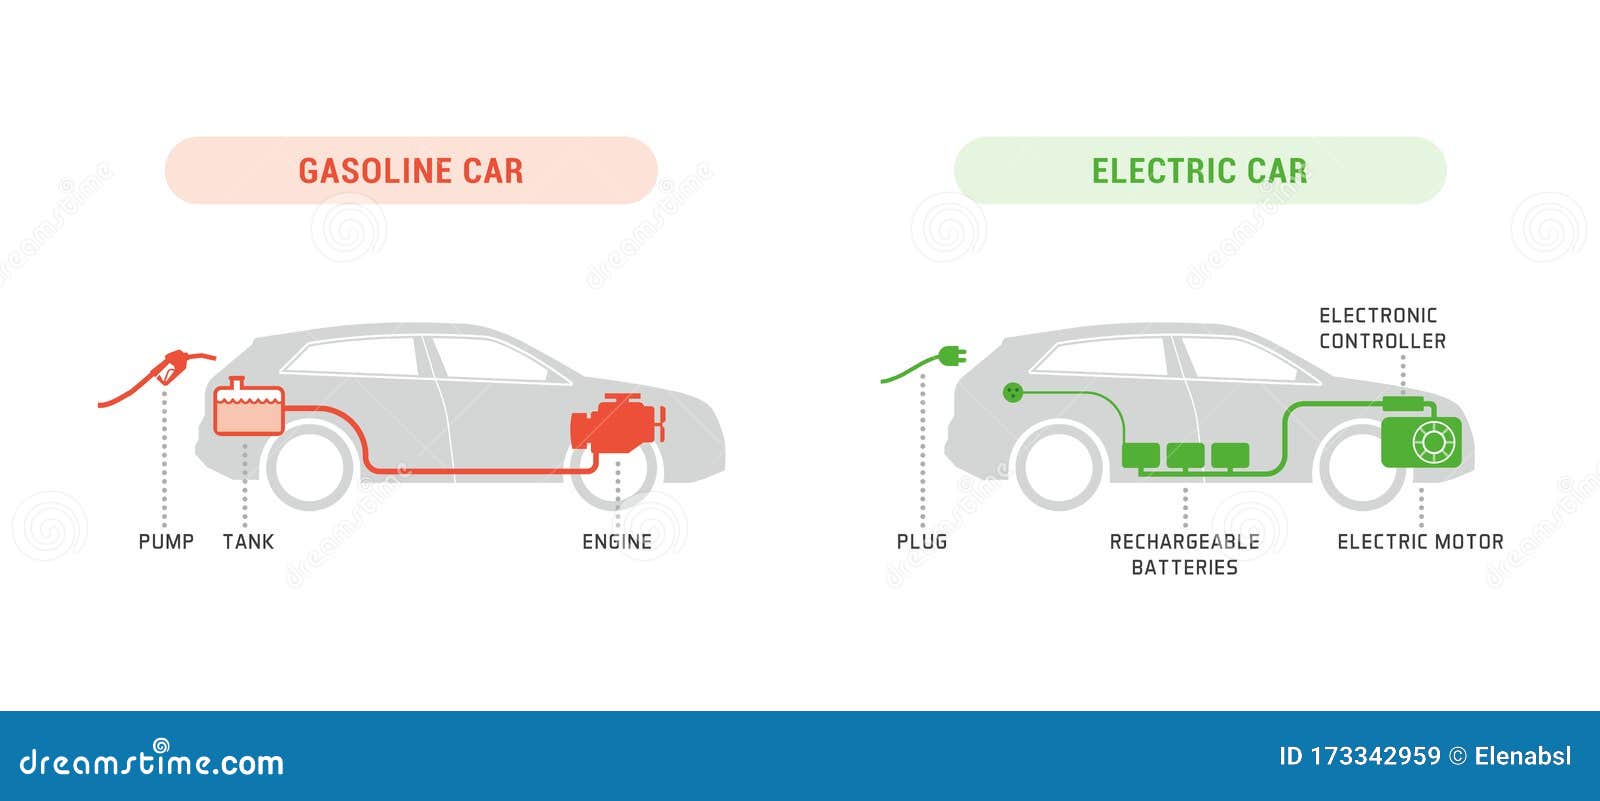 Gasoline Car and Electric Car Comparison Infographic Stock Vector